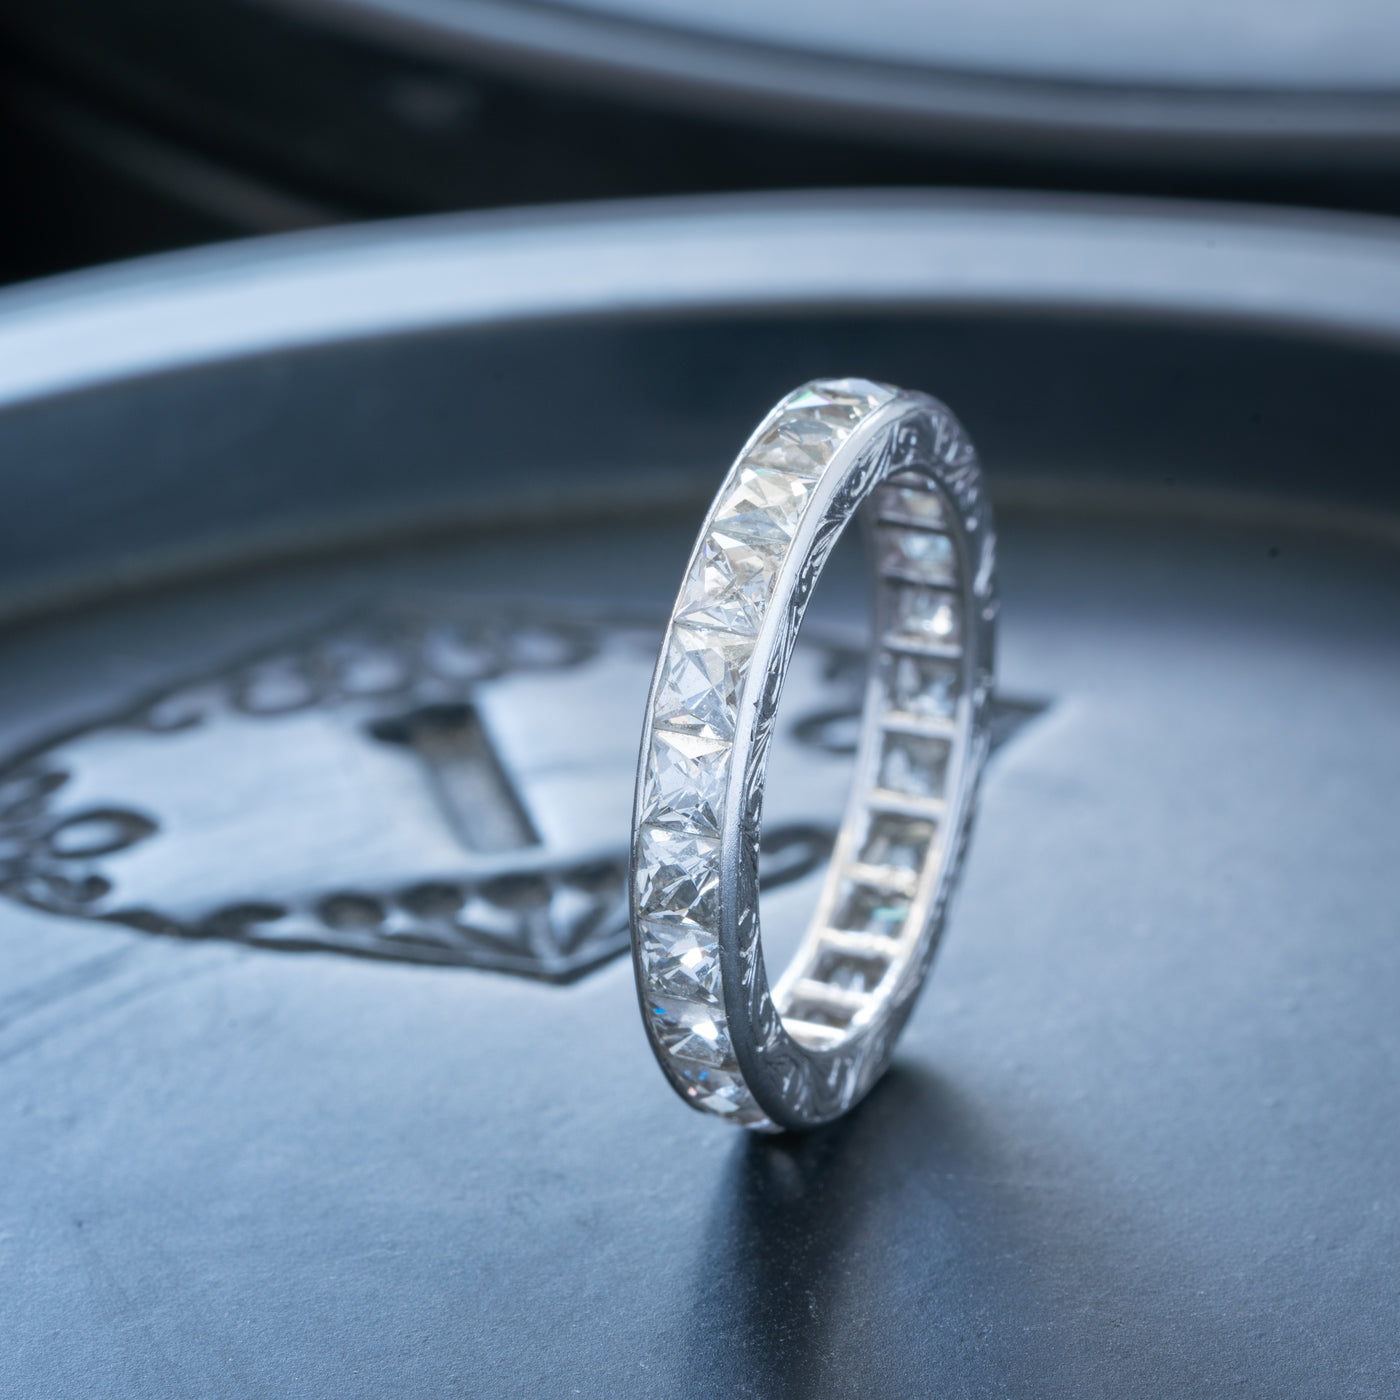 HAND ENGRAVED PLATINUM AND 4.0CTS. FRENCH CUT DIAMOND ETERNITY RING